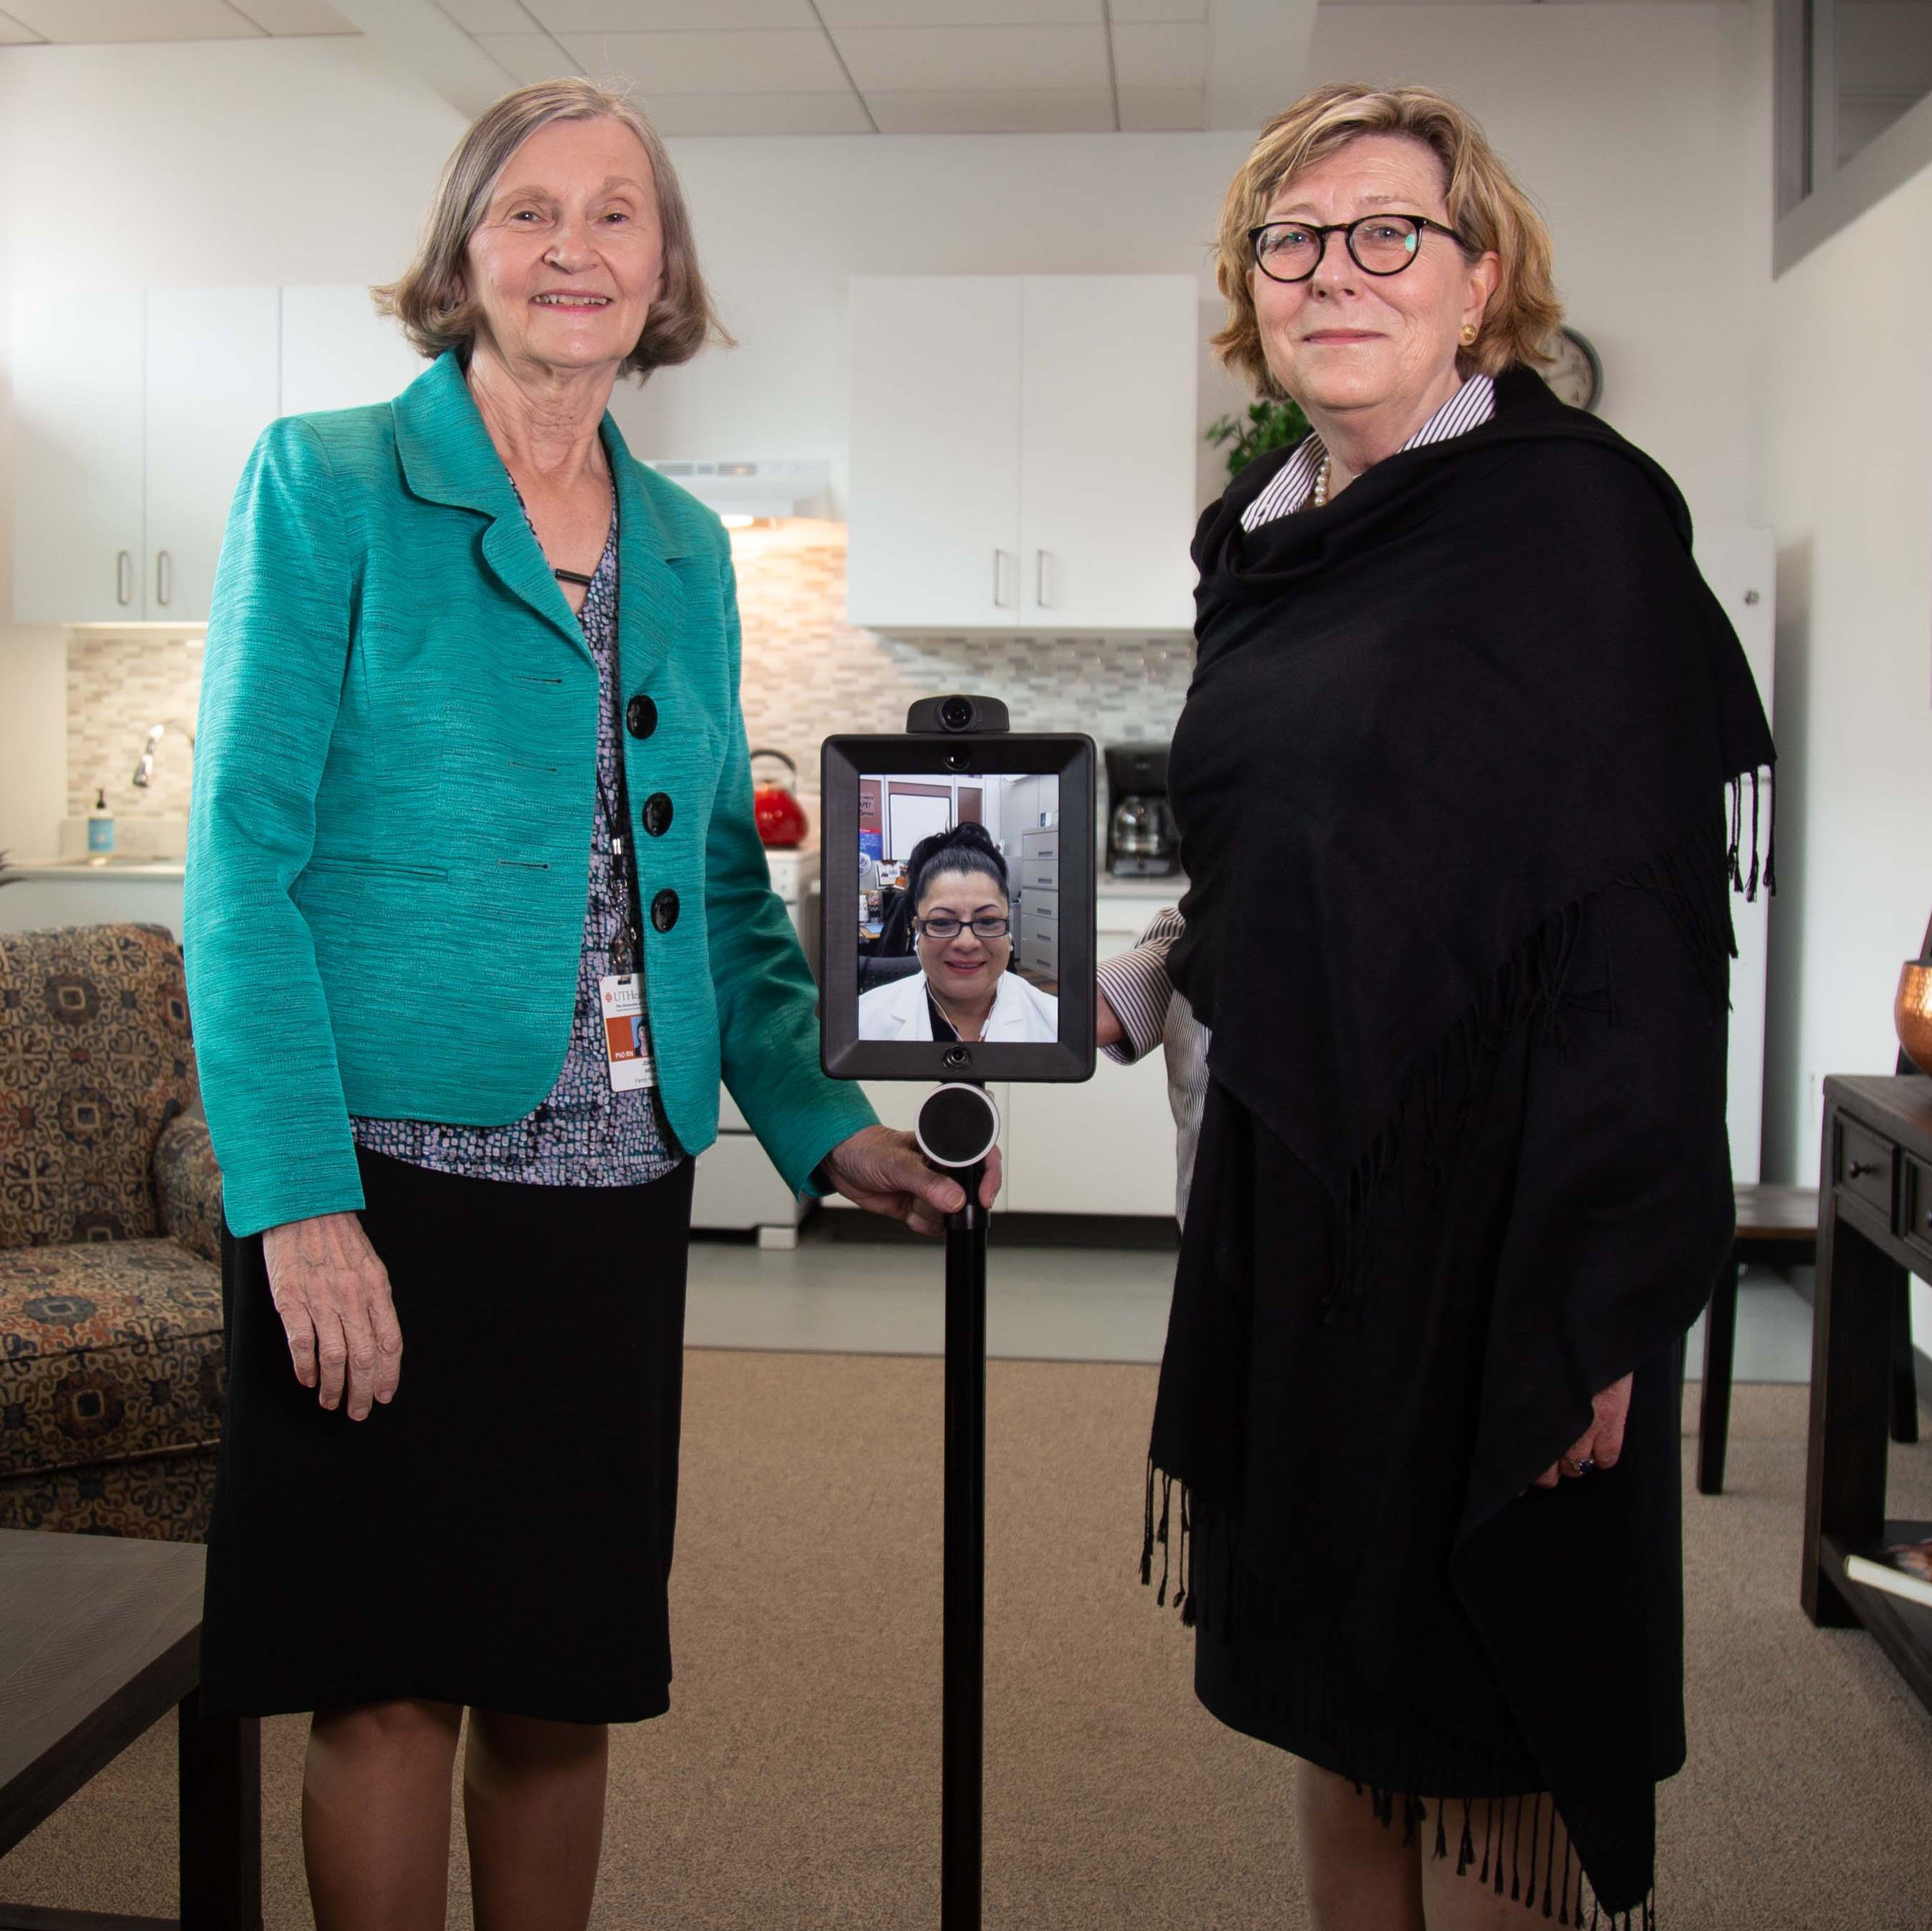 Cizik School of Nursing at UTHealth professors Joanne Hickey, PhD, RN, and Constance Johnson, PhD, RN, demonstrate robotic monitoring technology in the Smart Apartment.